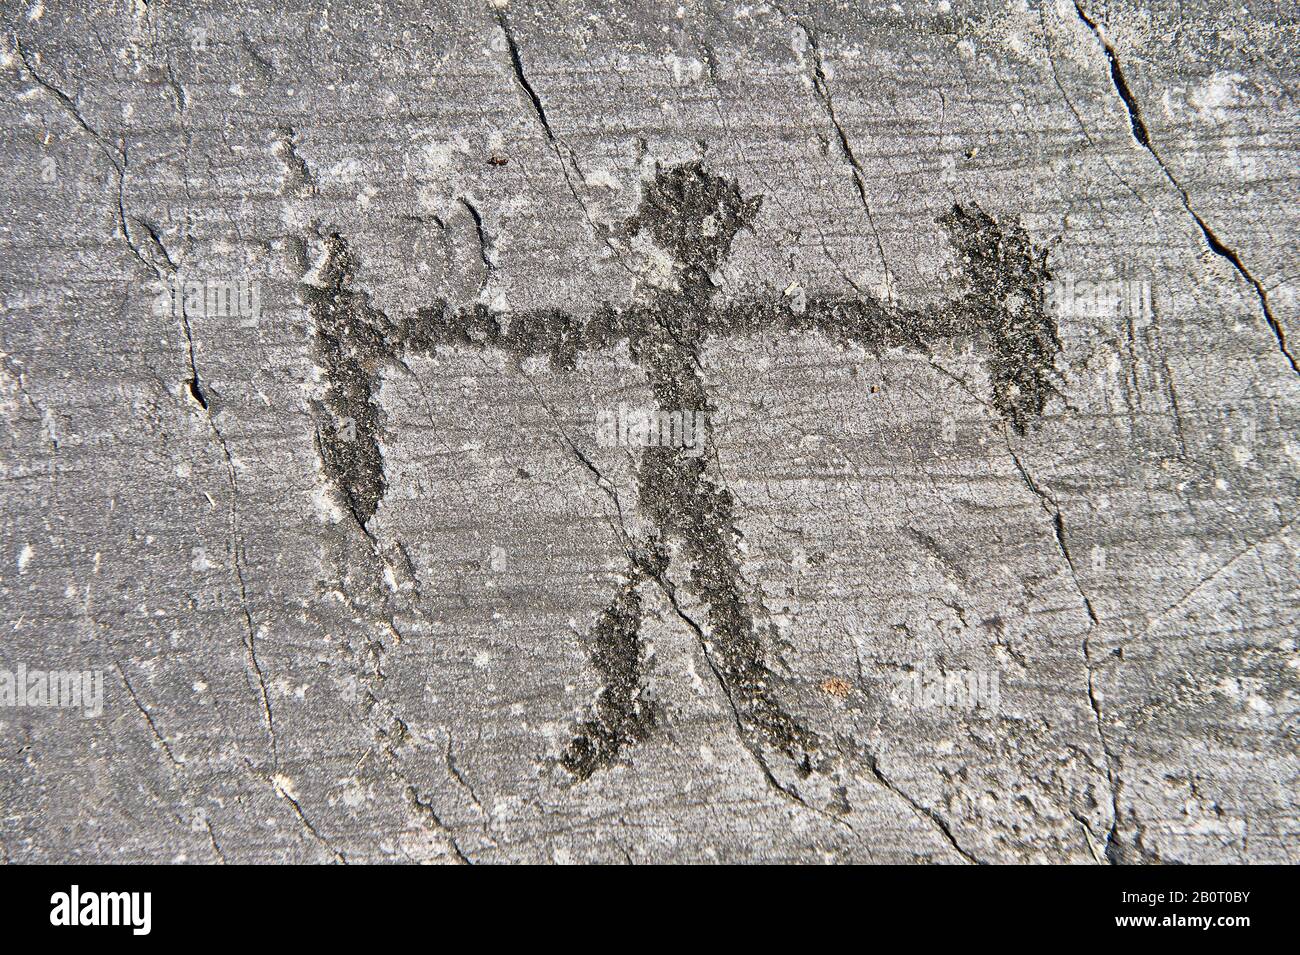 Petroglyph, rock carving, of schematic human figure with a sheilf and weapon. Carved by the ancient Camuni people in the Late Gopper Age between 2400 Stock Photo